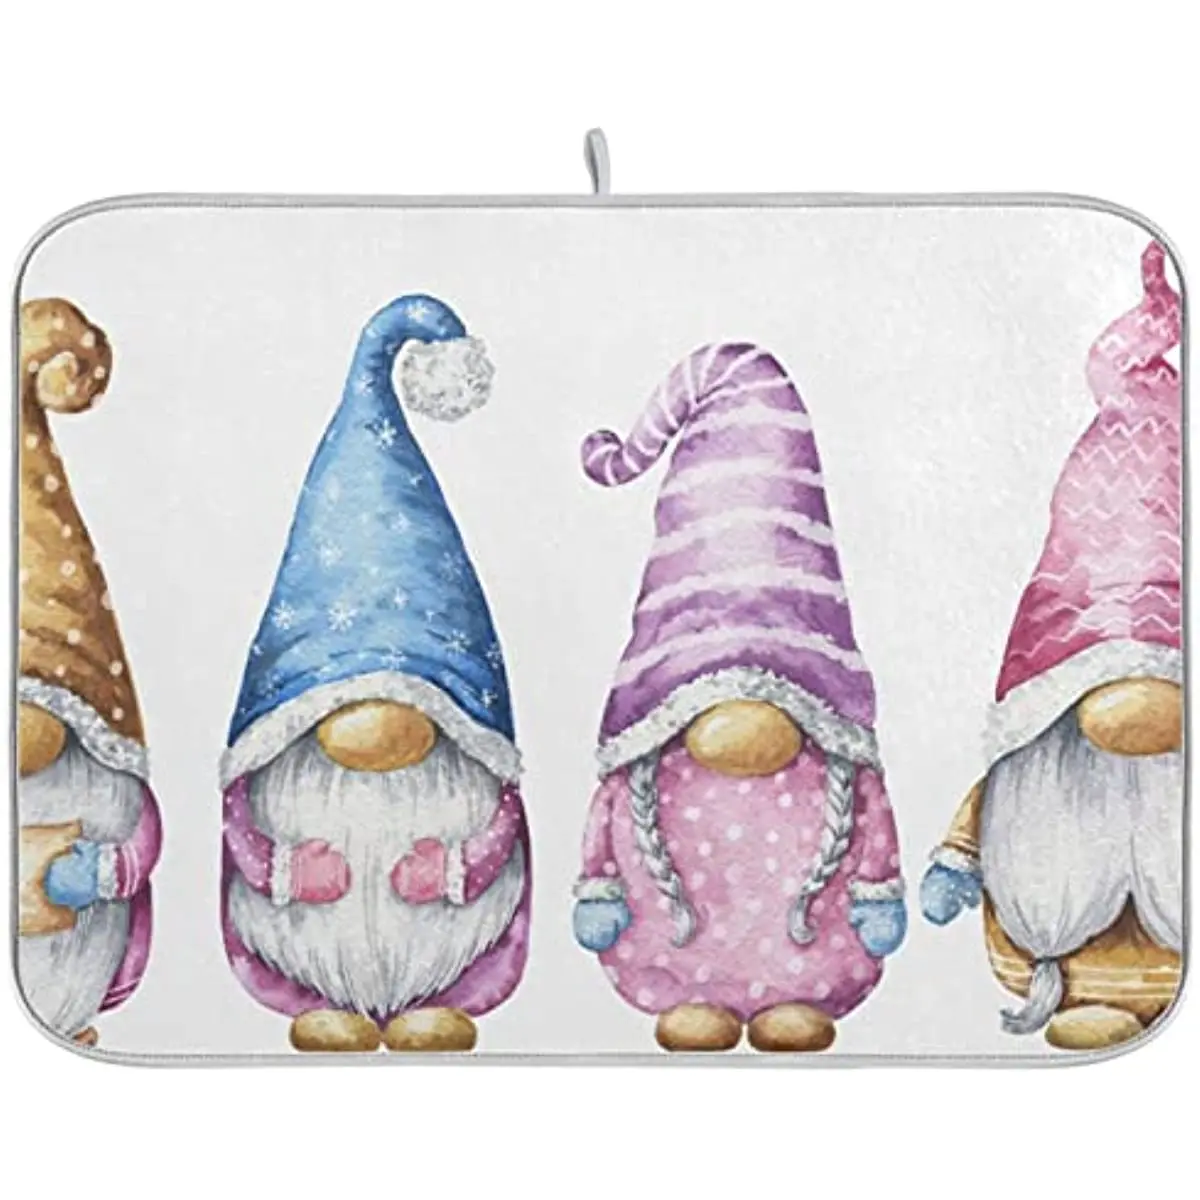 

Watercolor Cute Gnomes Dish Drying Mat, Absorbent Microfiber Pad Protector For Kitchen Counter Top Mat Dish Drainboard 18x24in